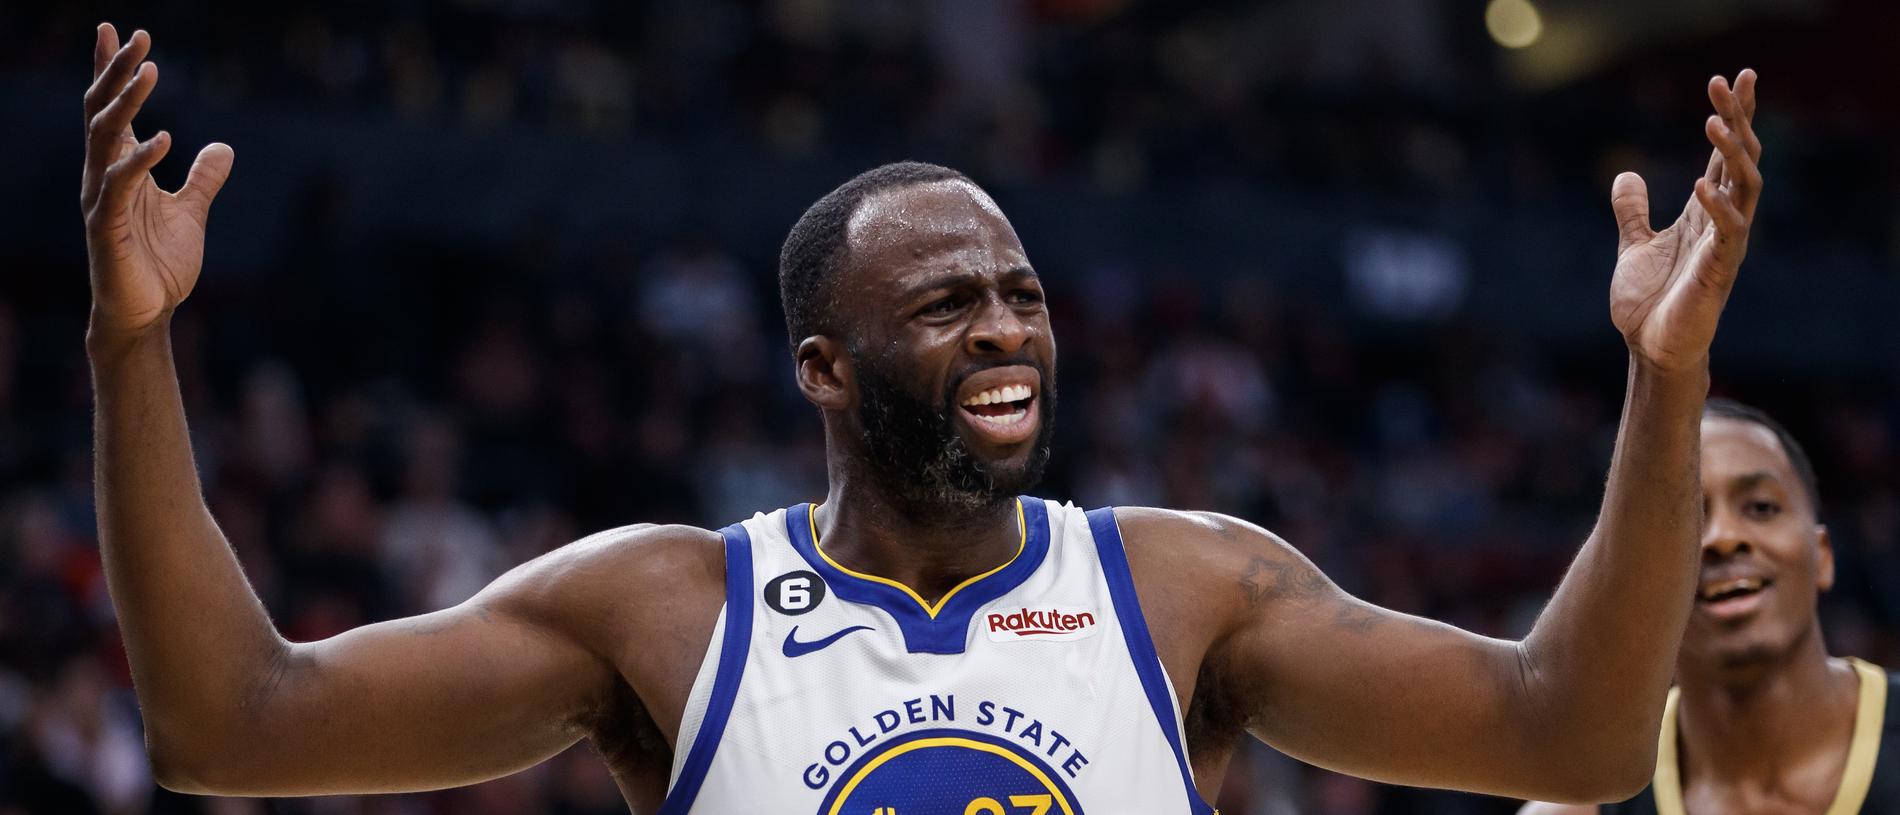 Why Steph Curry's record-breaking 3-pointer shocked Draymond Green